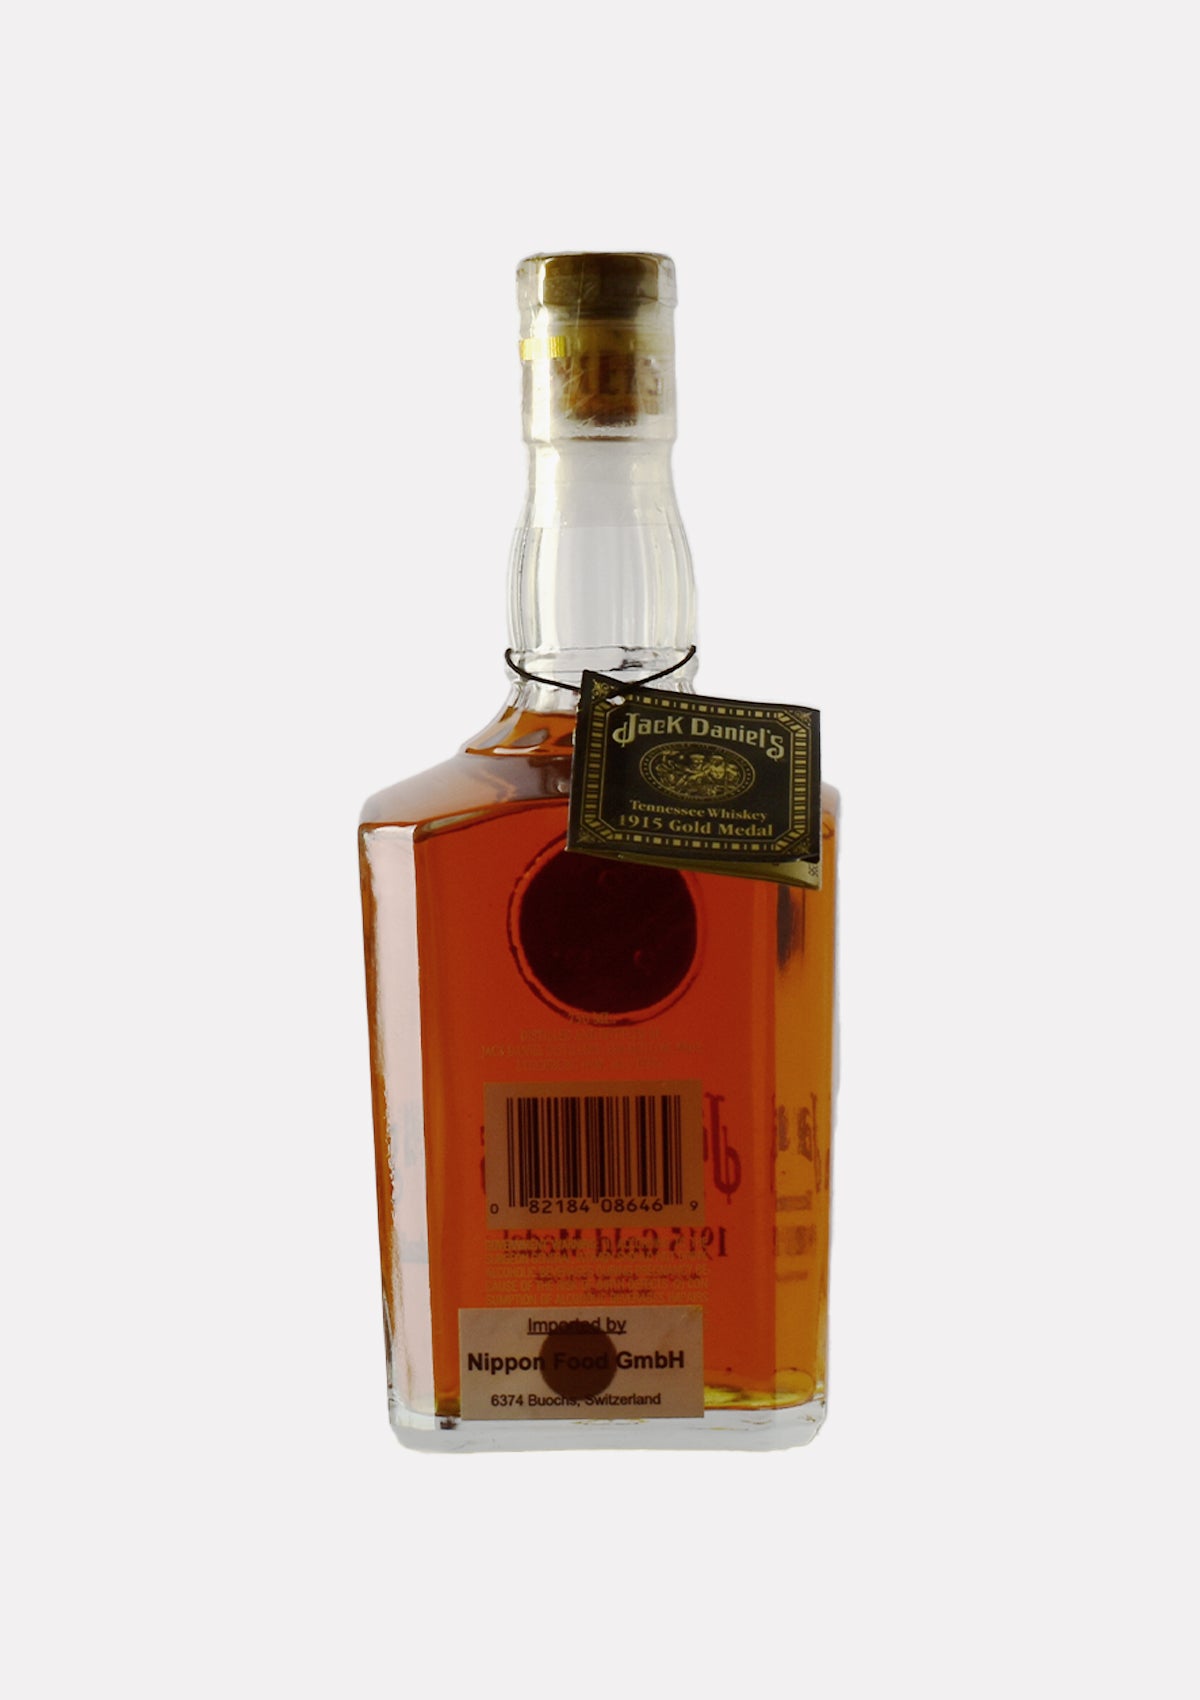 Jack Daniel`s Tennessee Whiskey 1915 Gold Medal